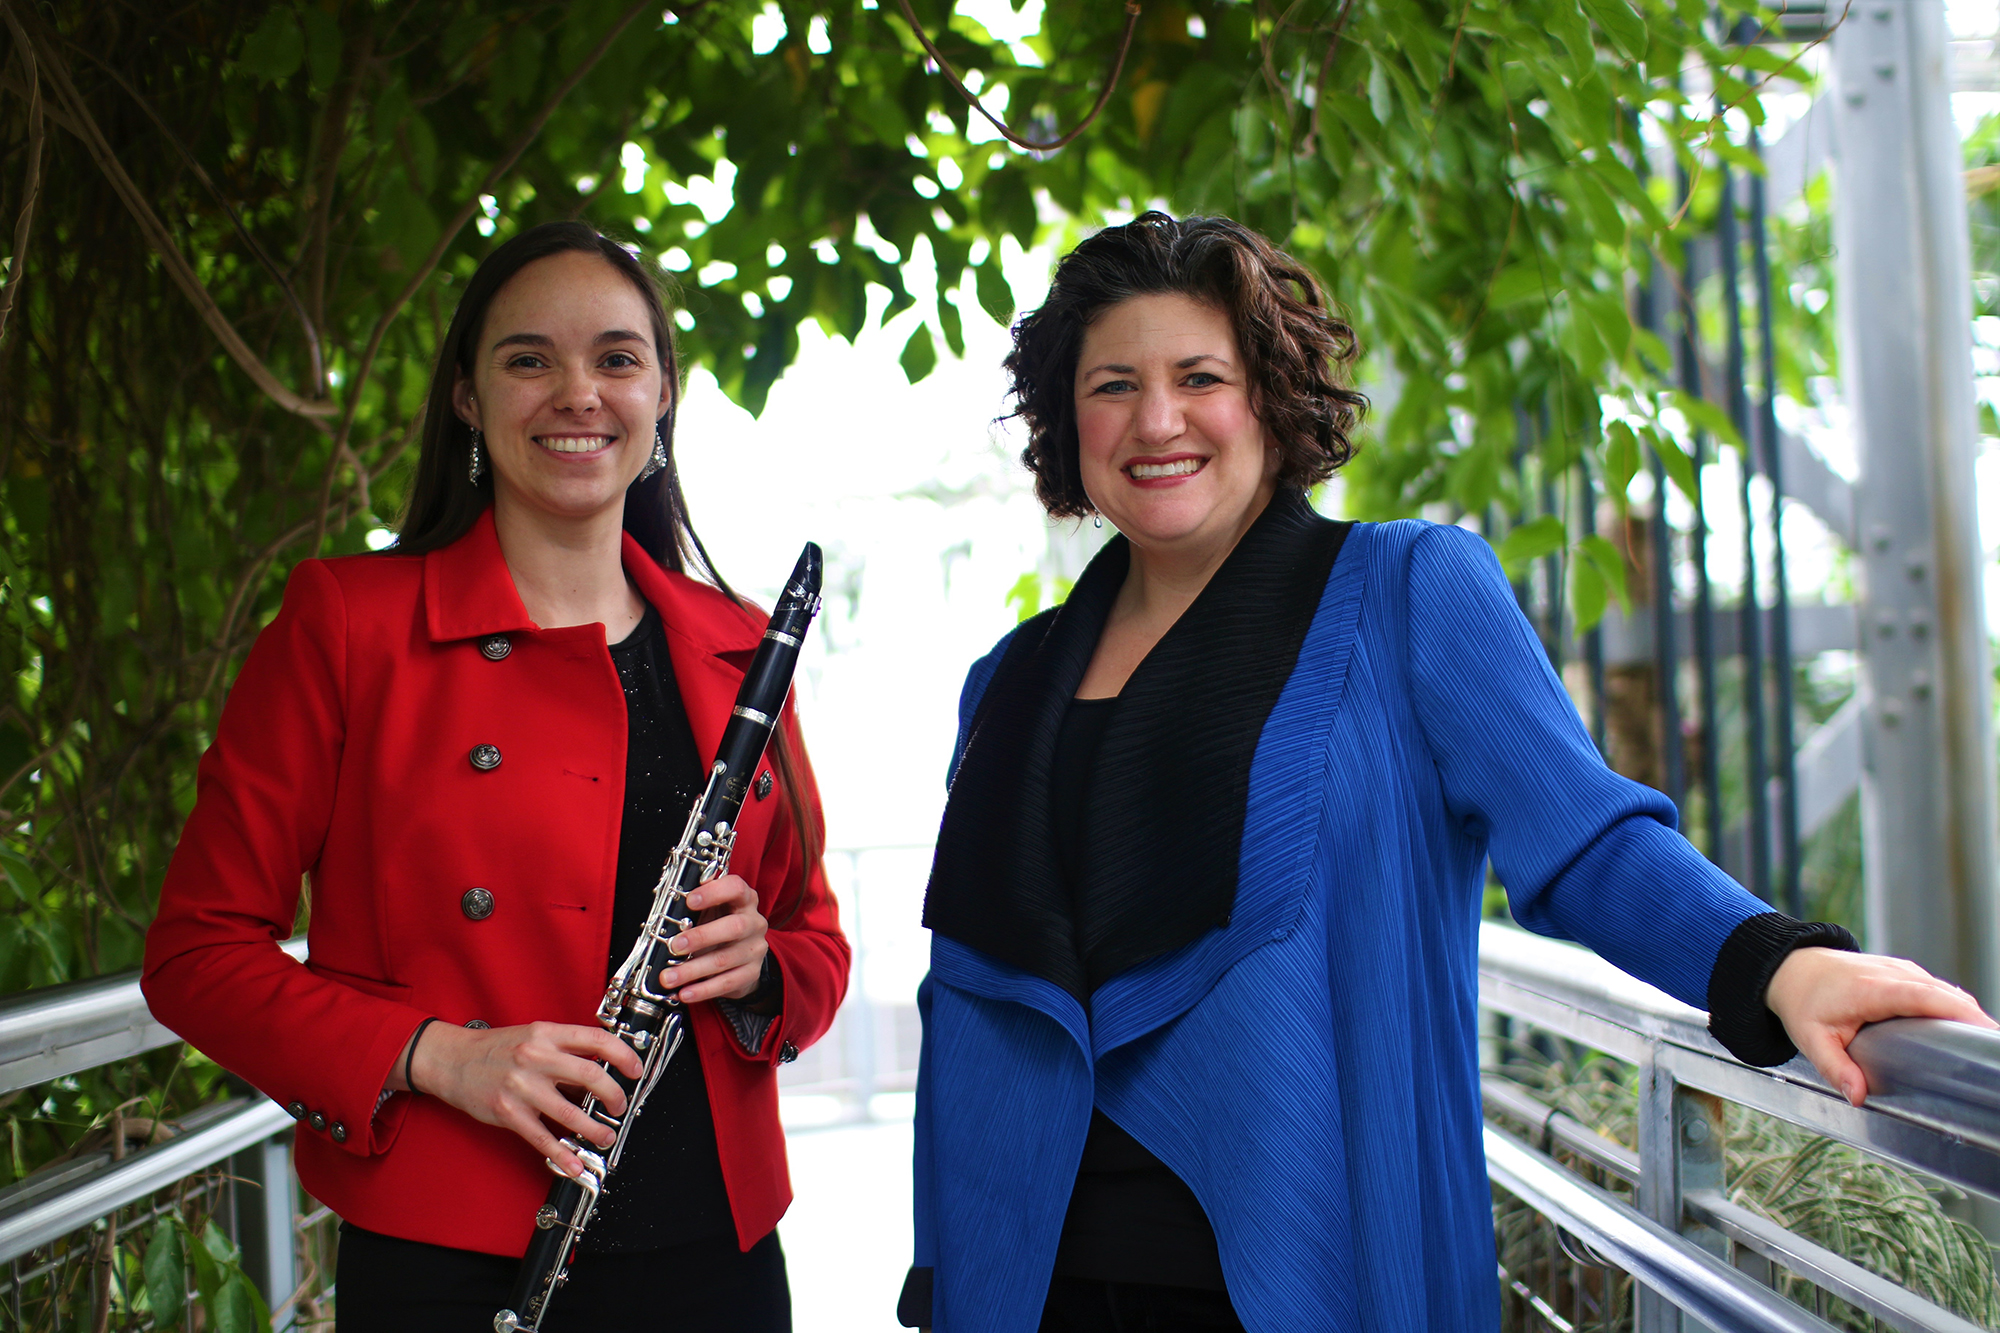 Two women smile at the camera. On the left, a woman holds a flute and wears red. On the right, the woman is dressed in blue and black.